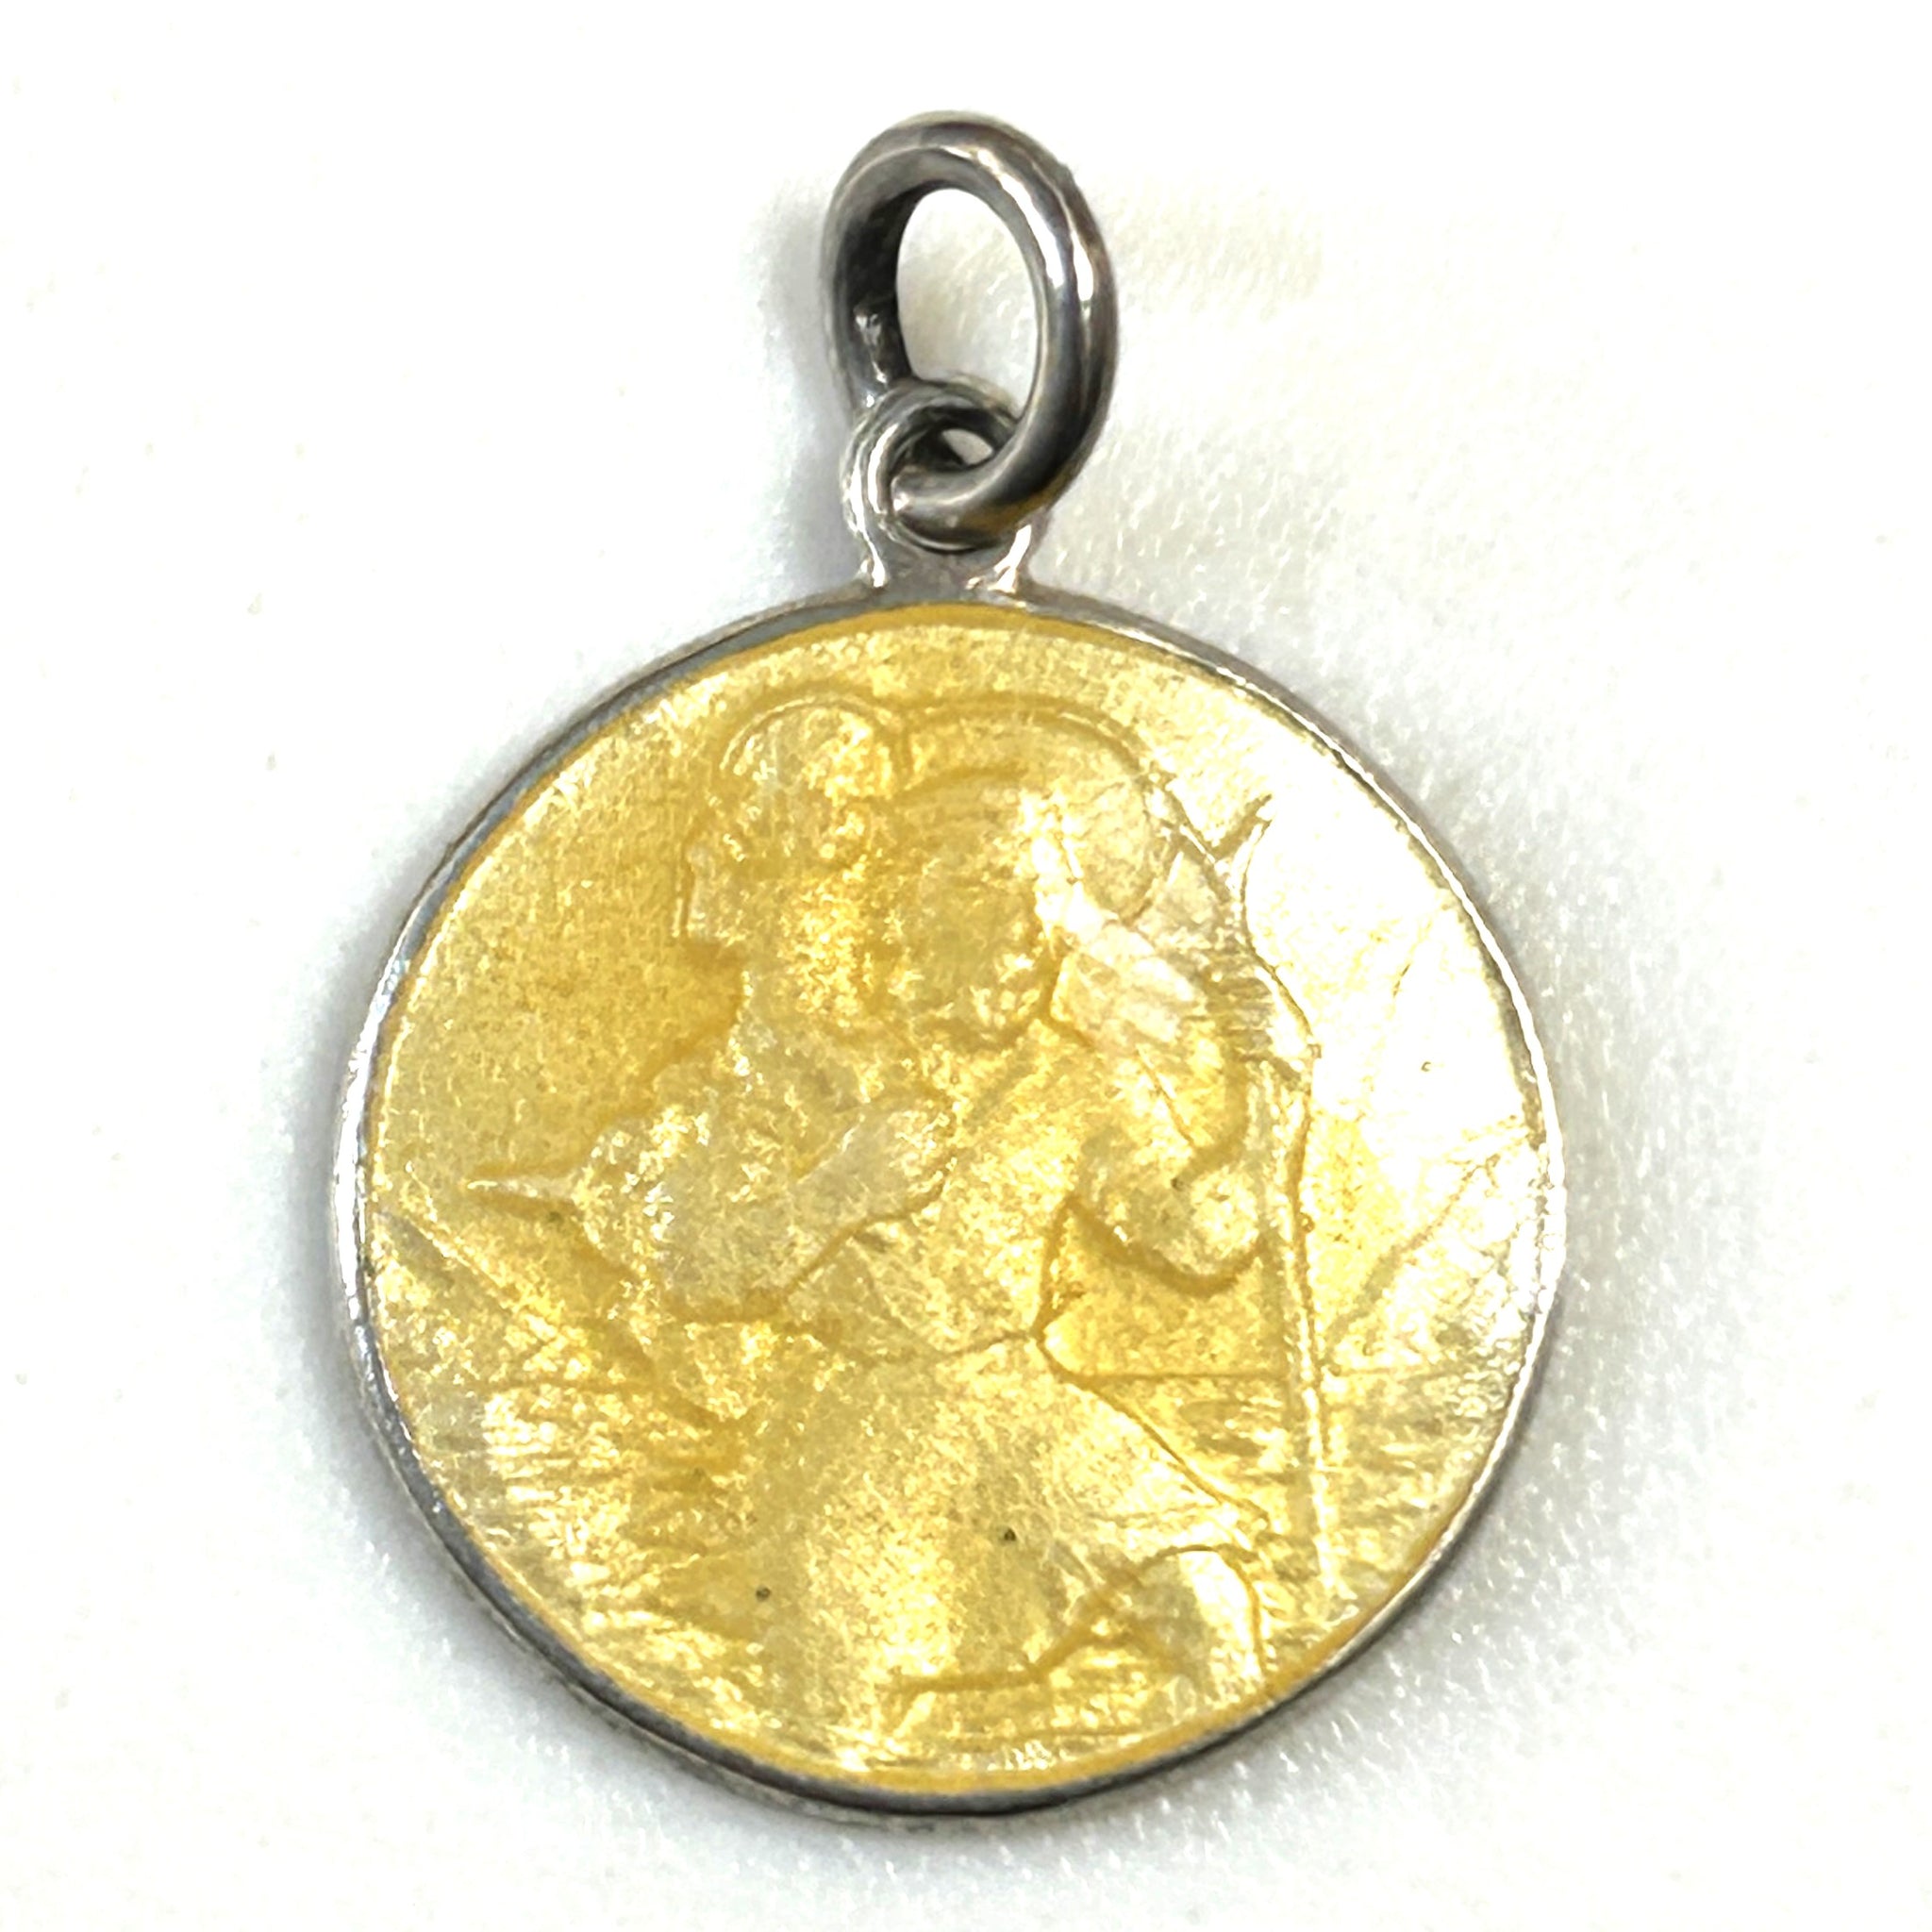 Miniature Silver and Yellow Enamel “St Christopher” Pendant